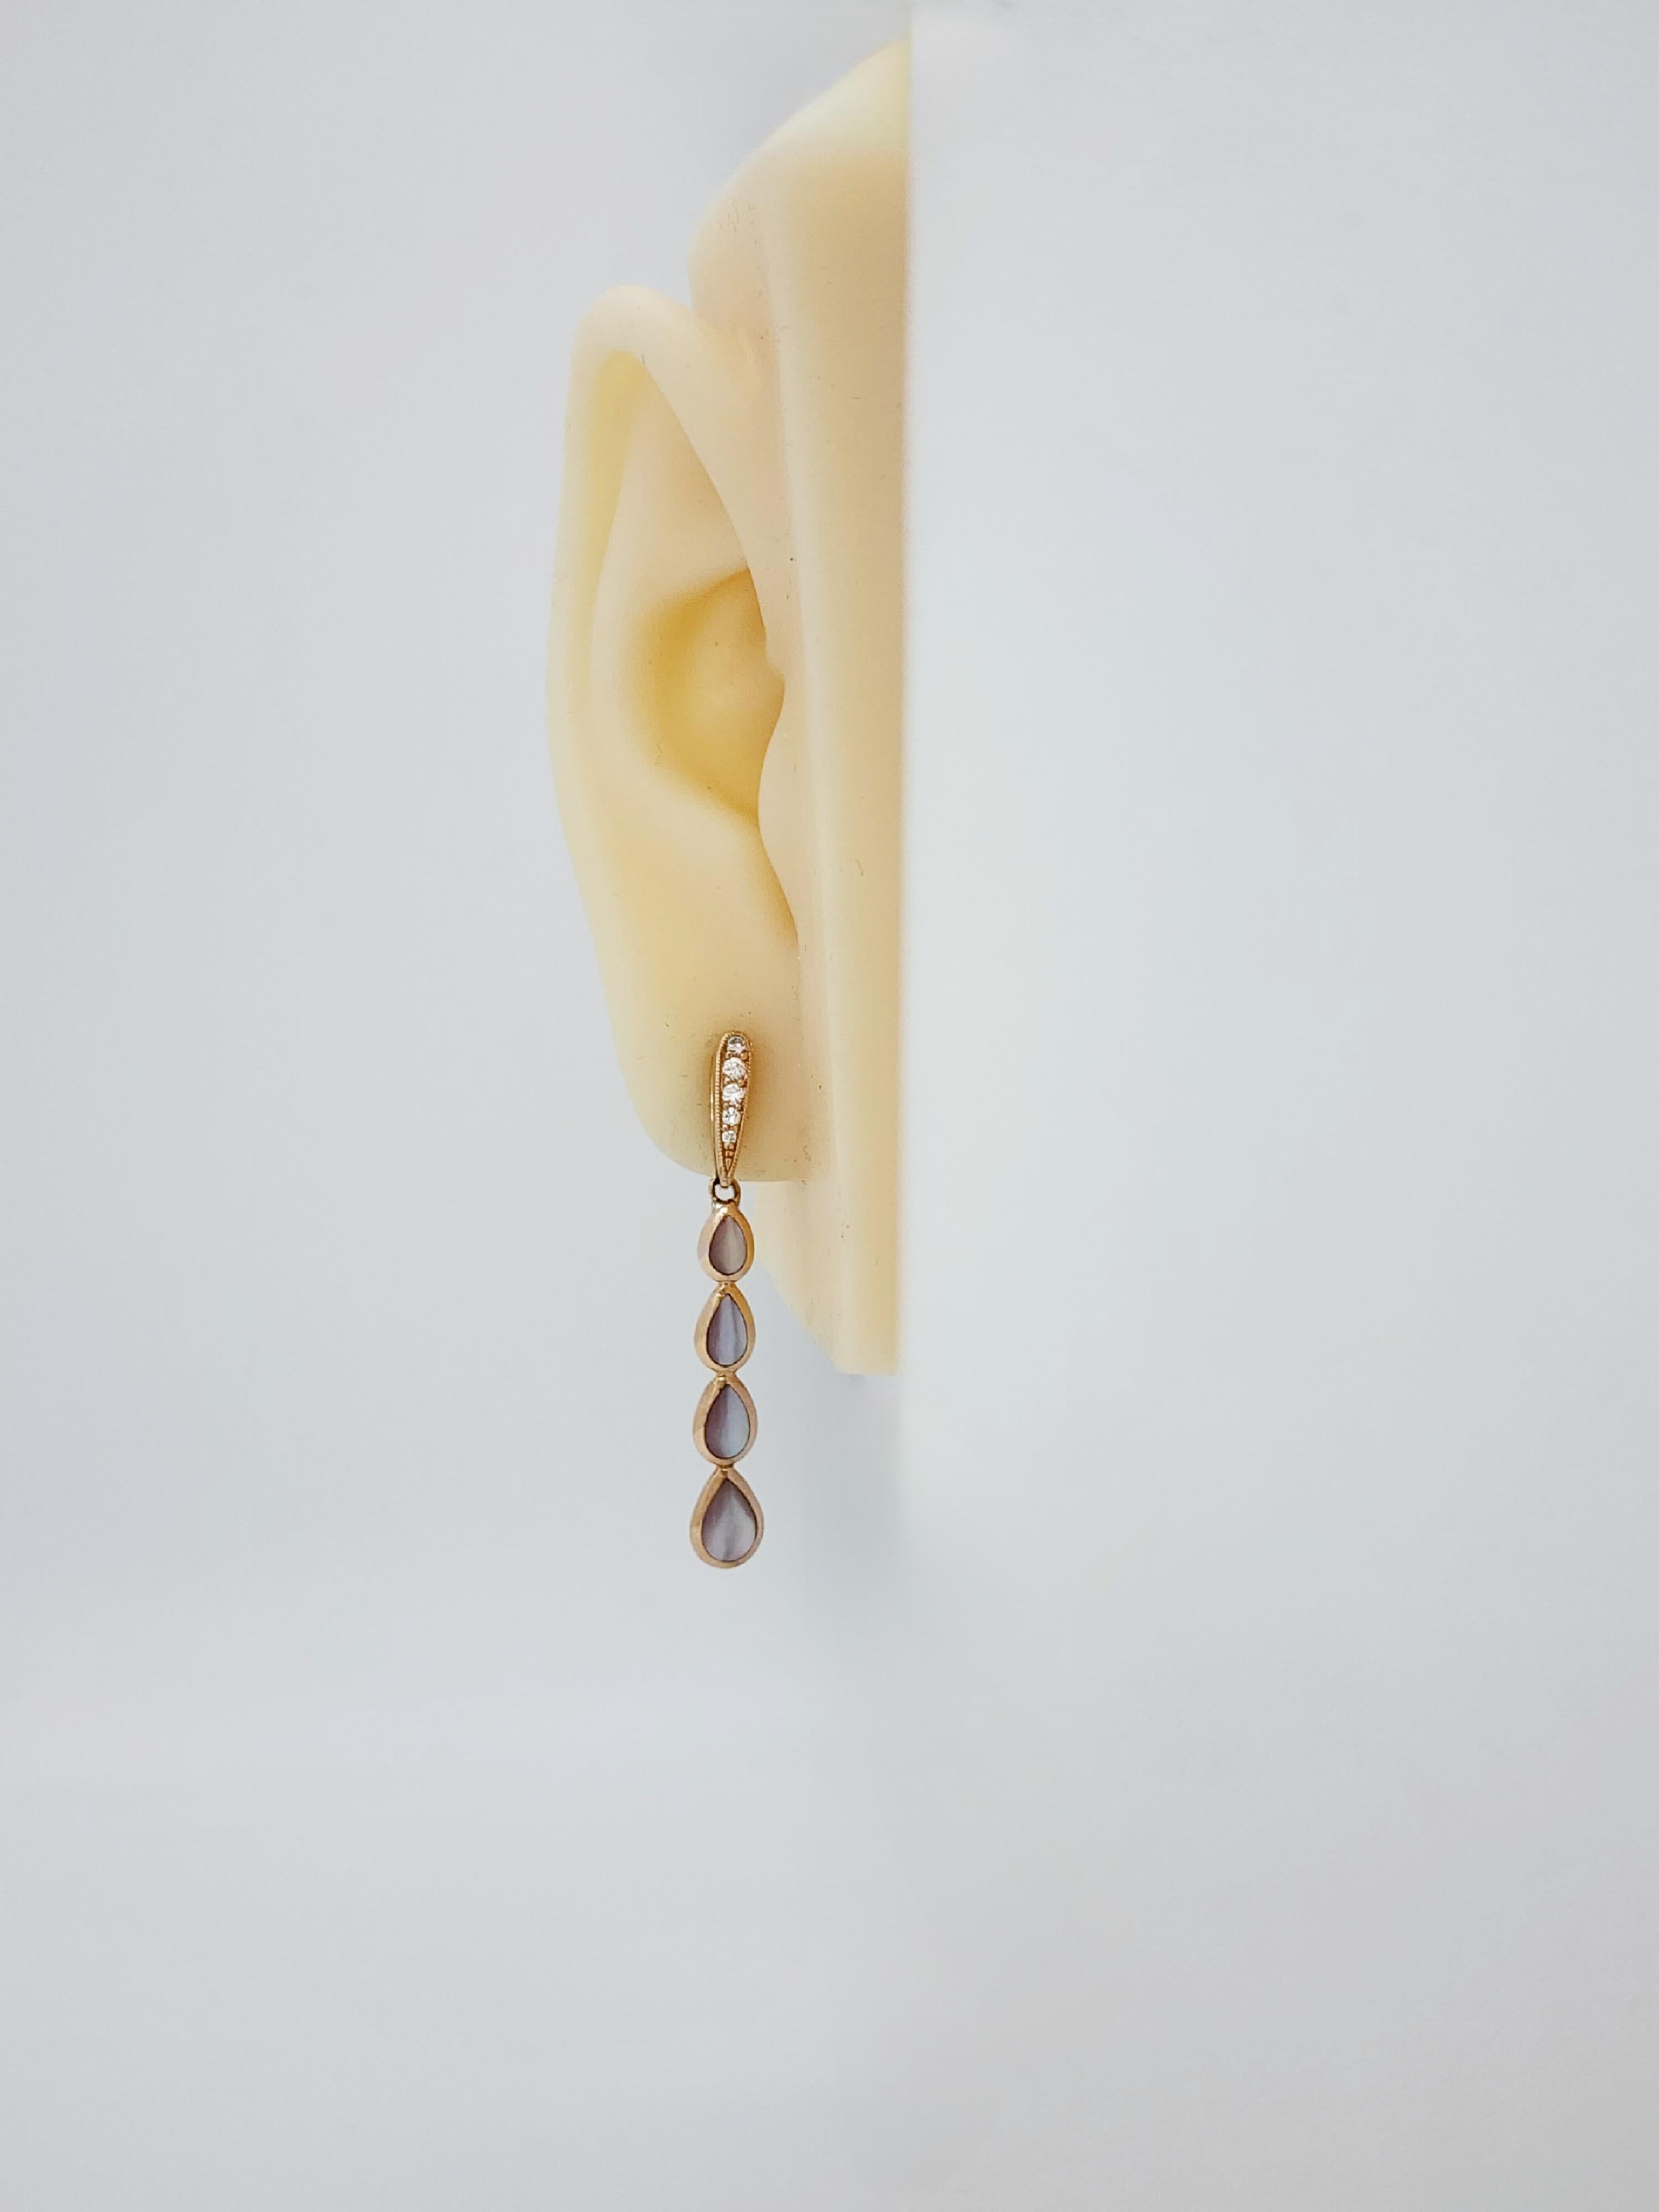 Gorgeous estate Kabana earrings with 8 big pear shape mother of pearls and 0.14 ct. of good quality white diamond rounds.  Handmade in 14k rose gold.